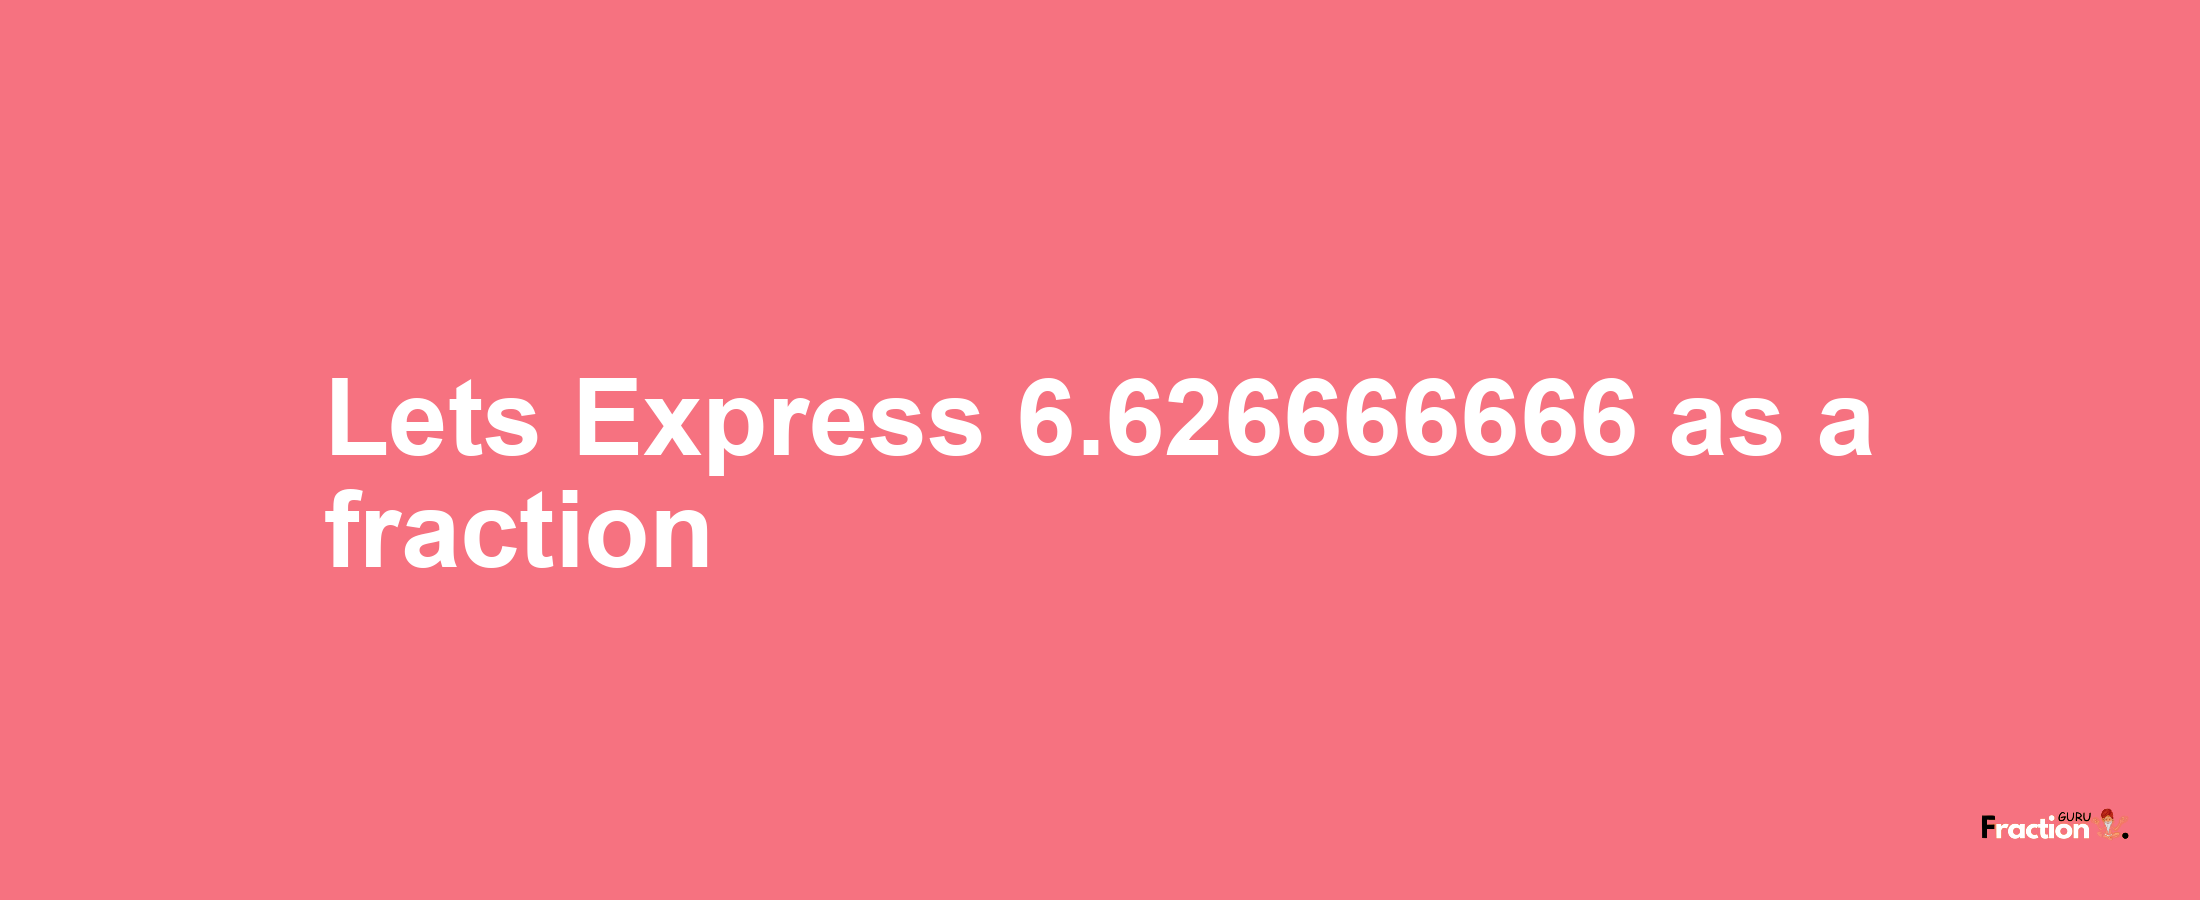 Lets Express 6.626666666 as afraction